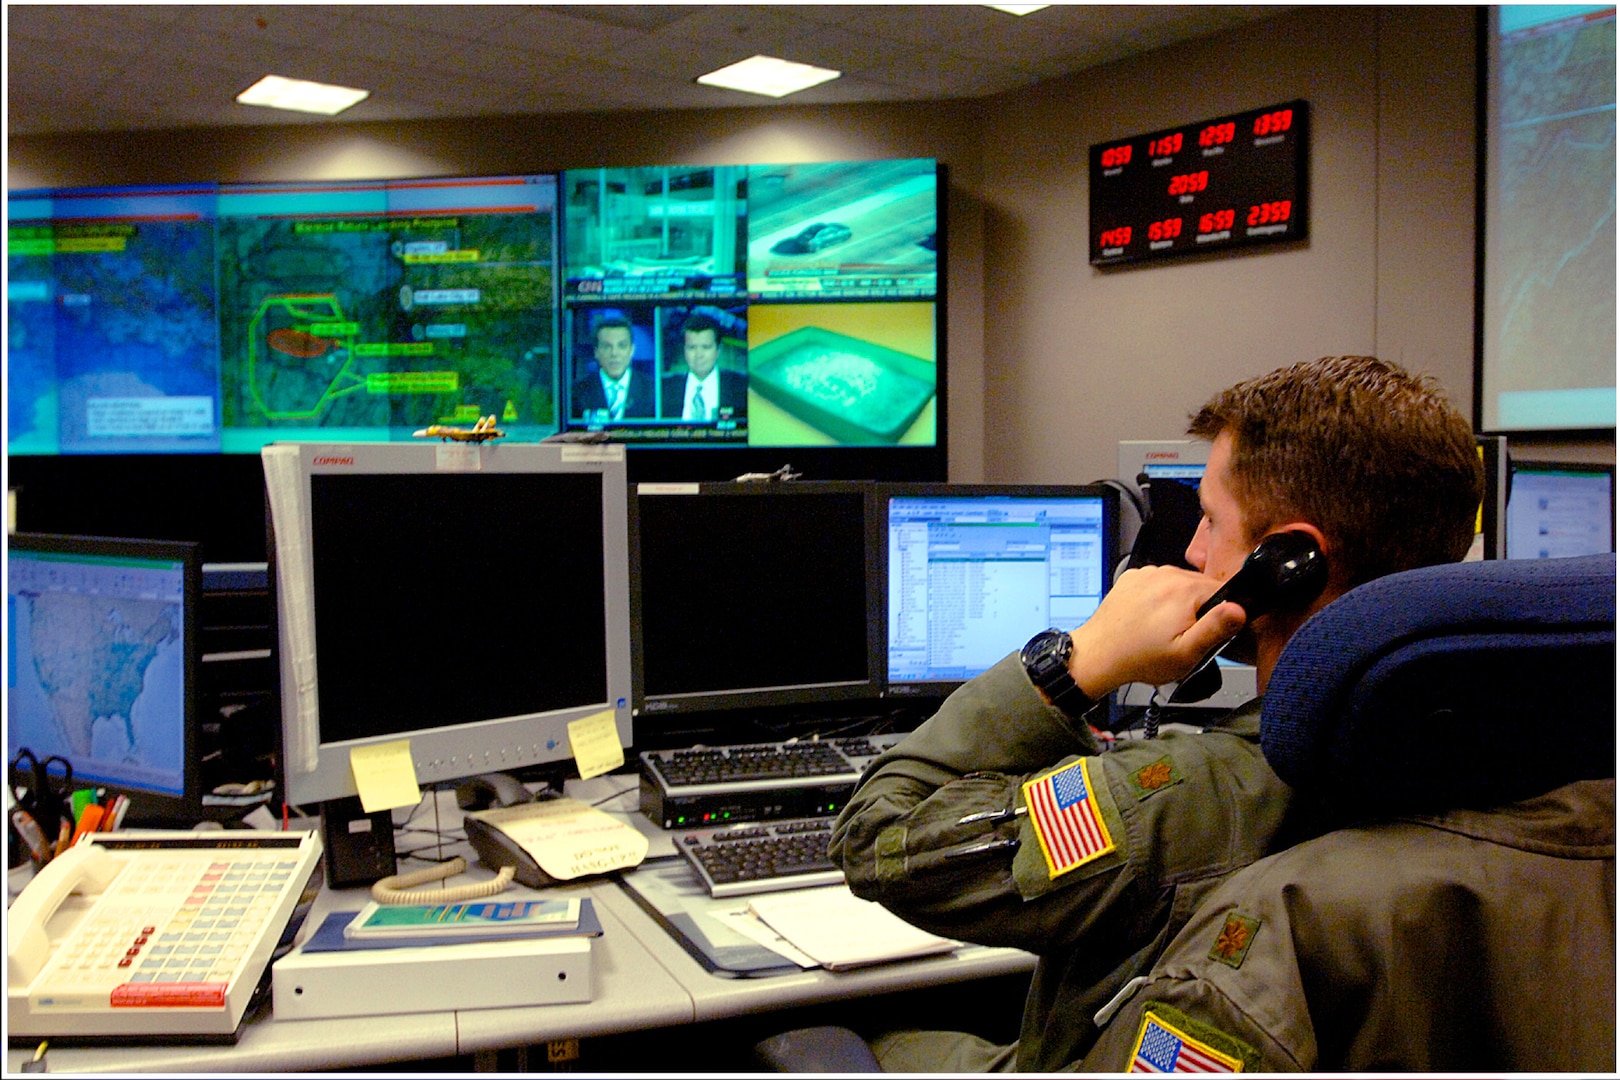 A photo of a North American Aerospace Defense Command and United States Northern Command operator answering the phone while on shift in the NORAD and USNORTHCOM command center.